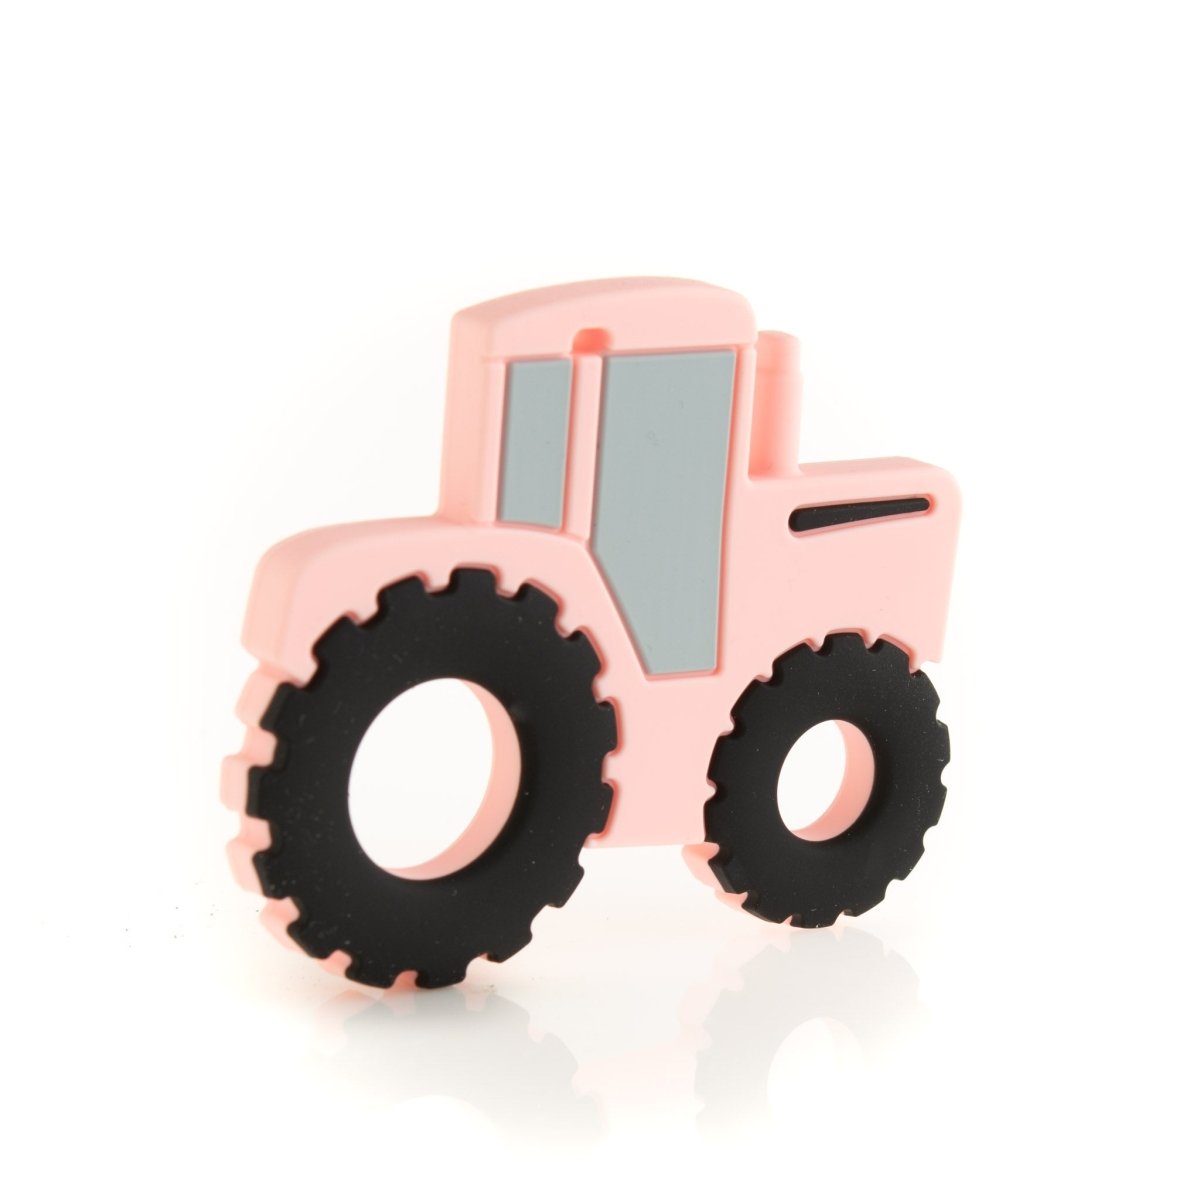 Silicone Teethers and Pendants Tractors Soft Pink from Cara & Co Craft Supply